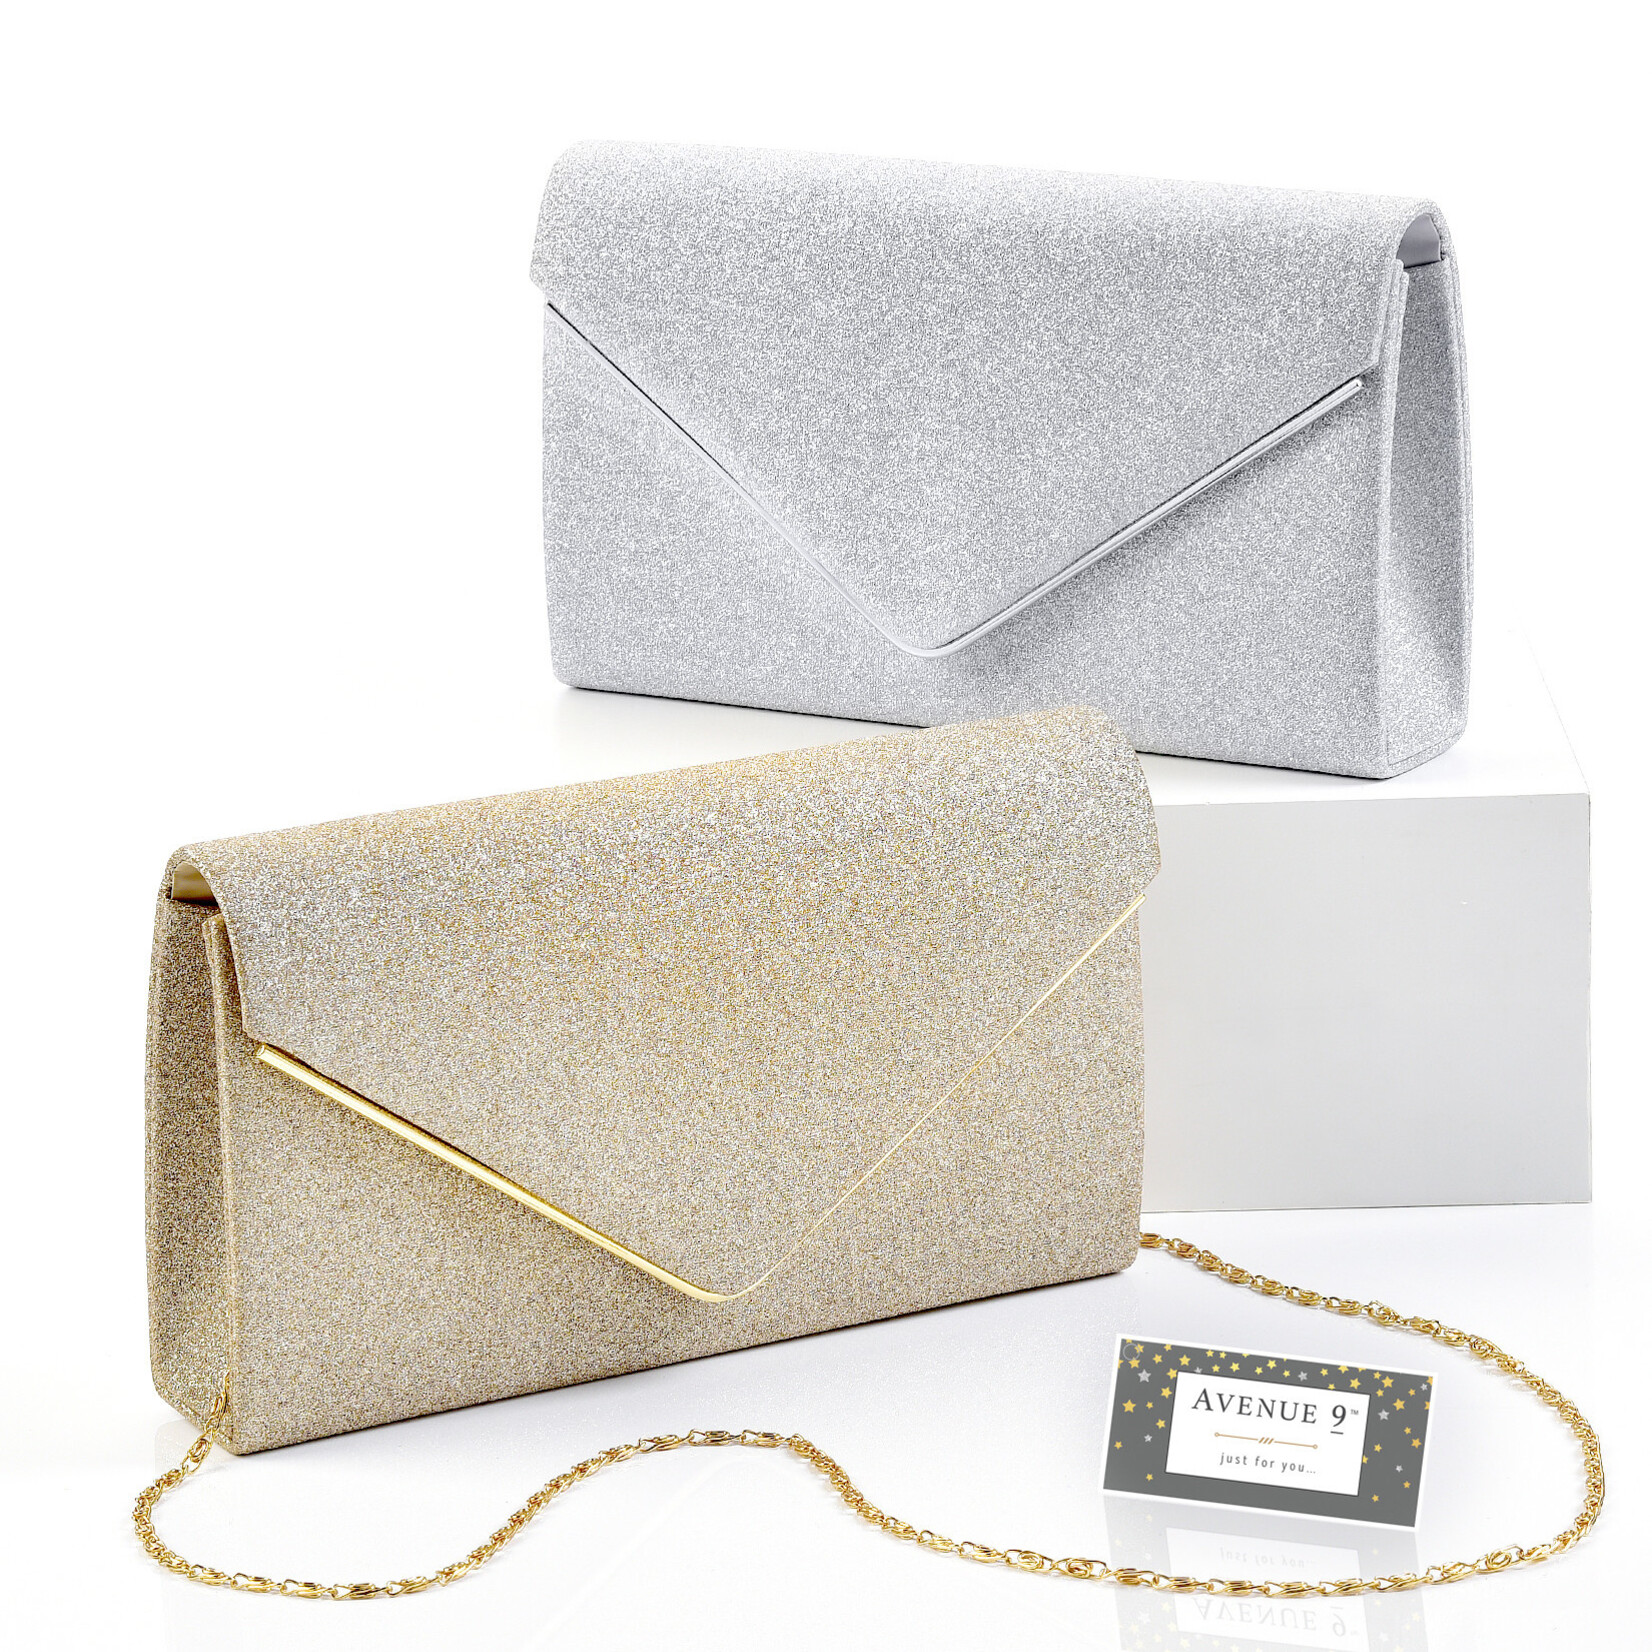 Giftcraft Glittered Polyester Evening Bag Gold